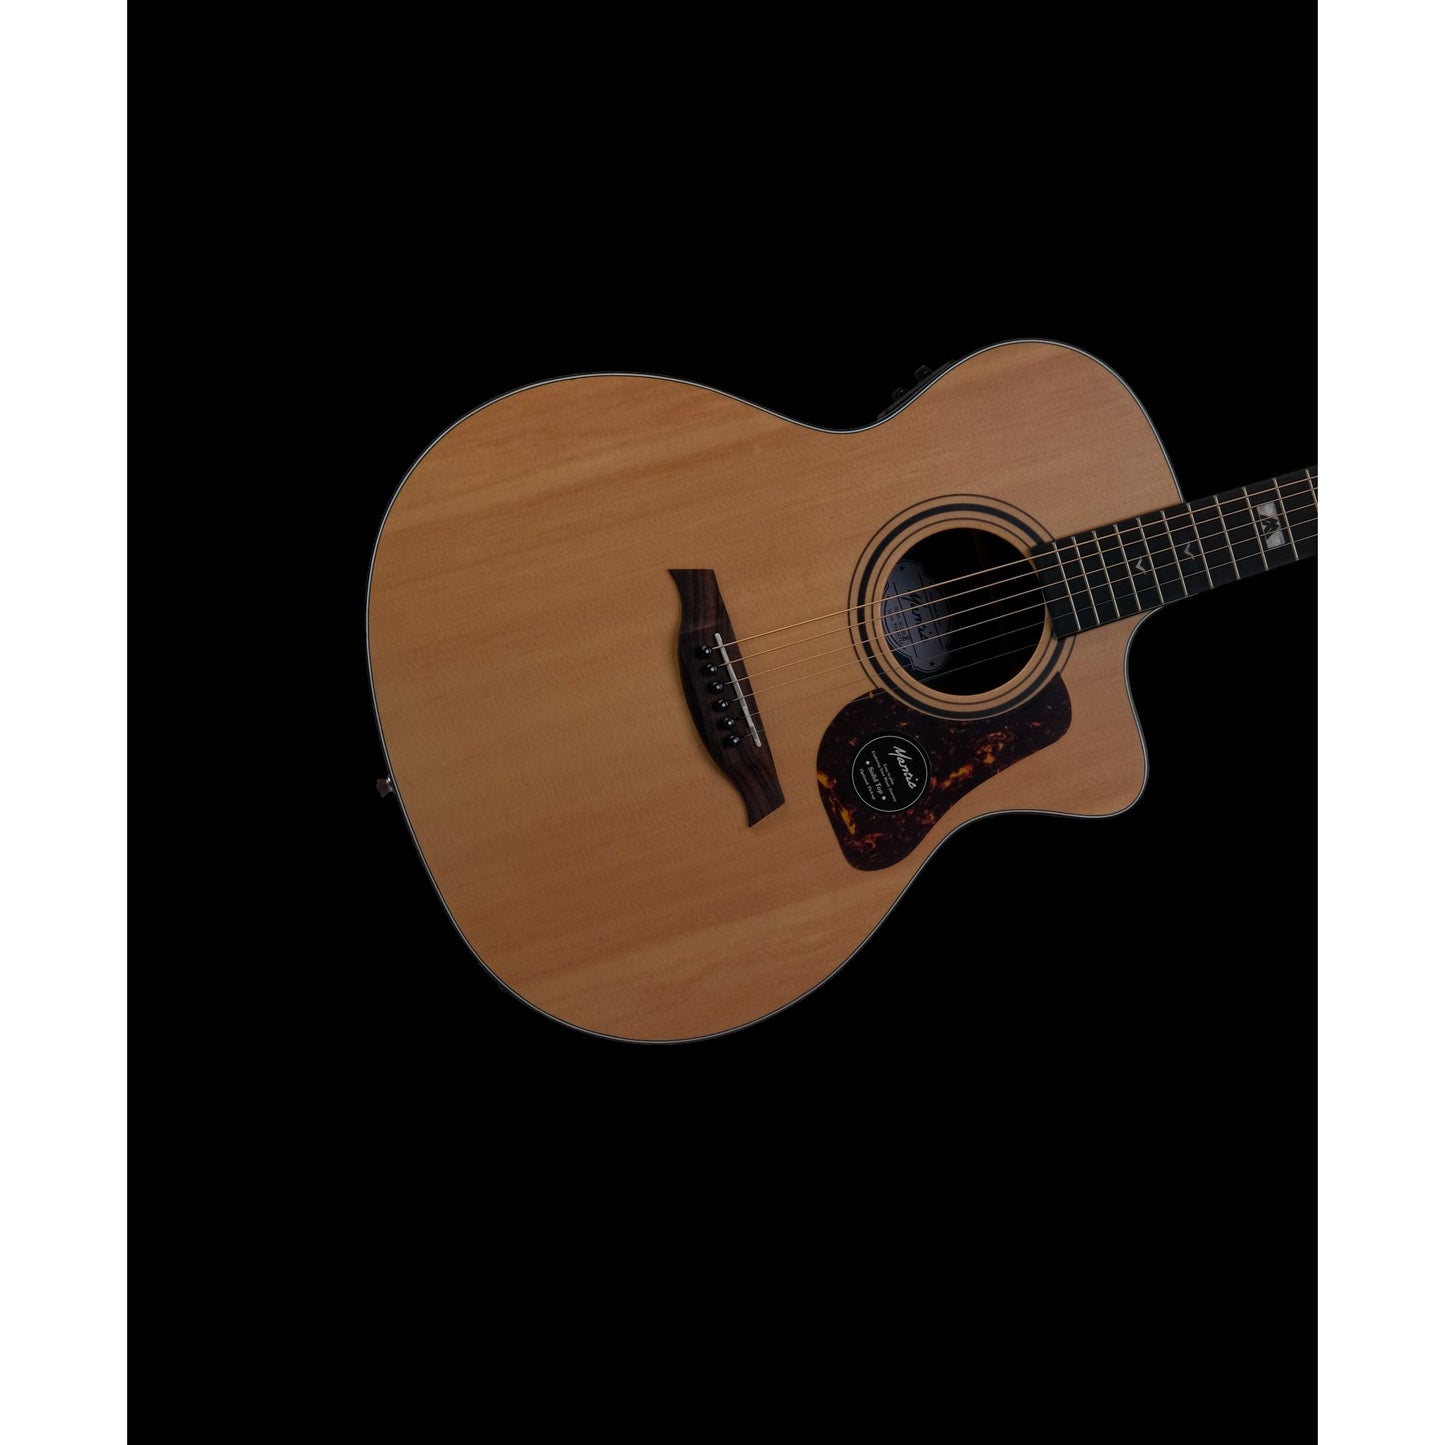 Mantic GT10GC-E Solid Top Semi- Acoustic Guitar with Fishman Electronics - Natural